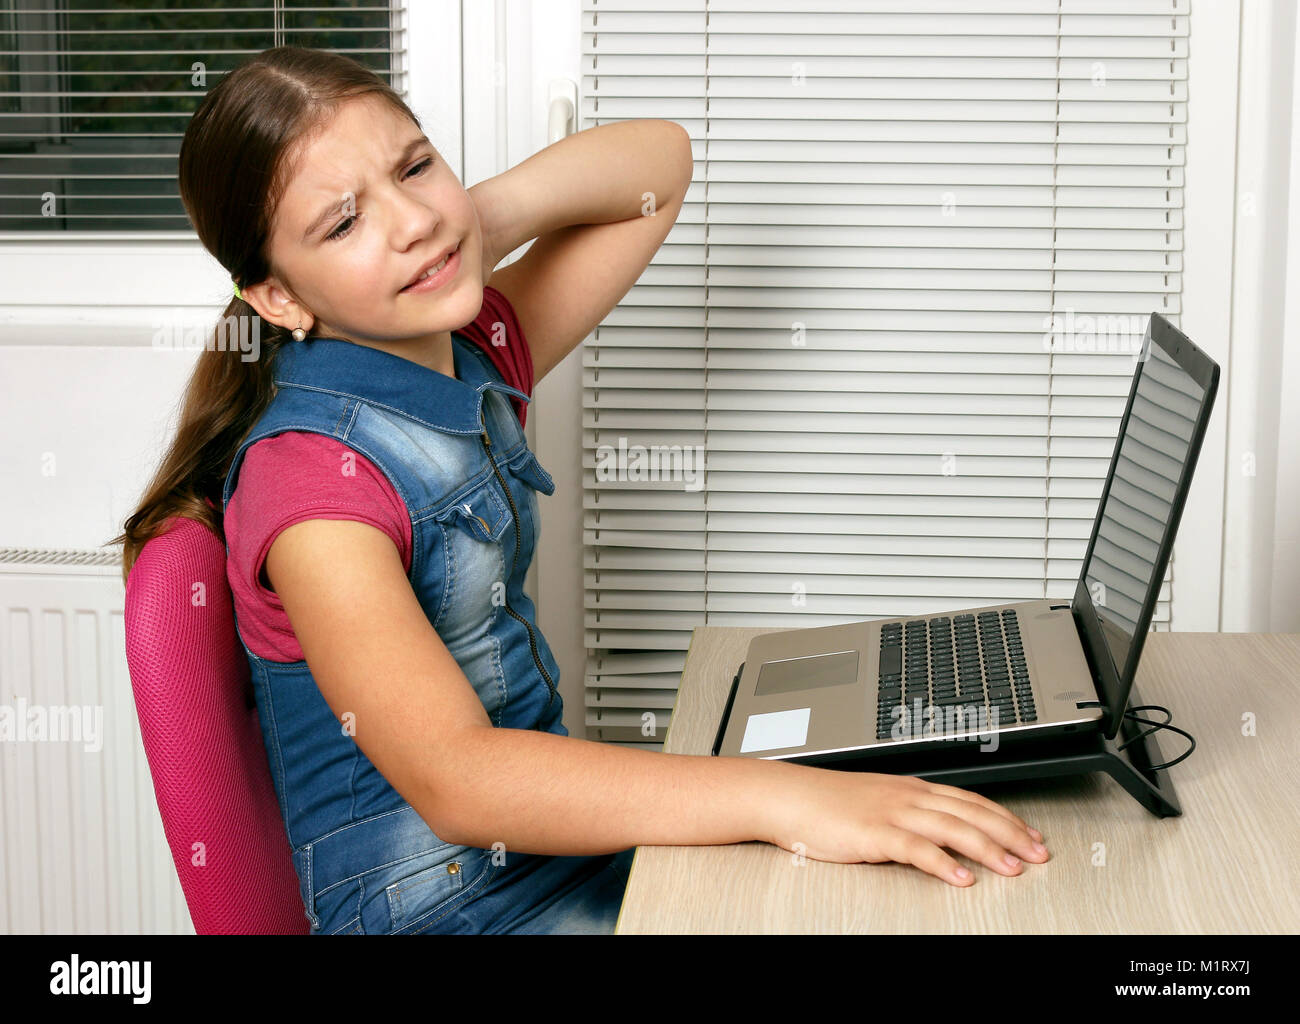 unhappy little girl has pain in her neck while using a laptop Stock Photo